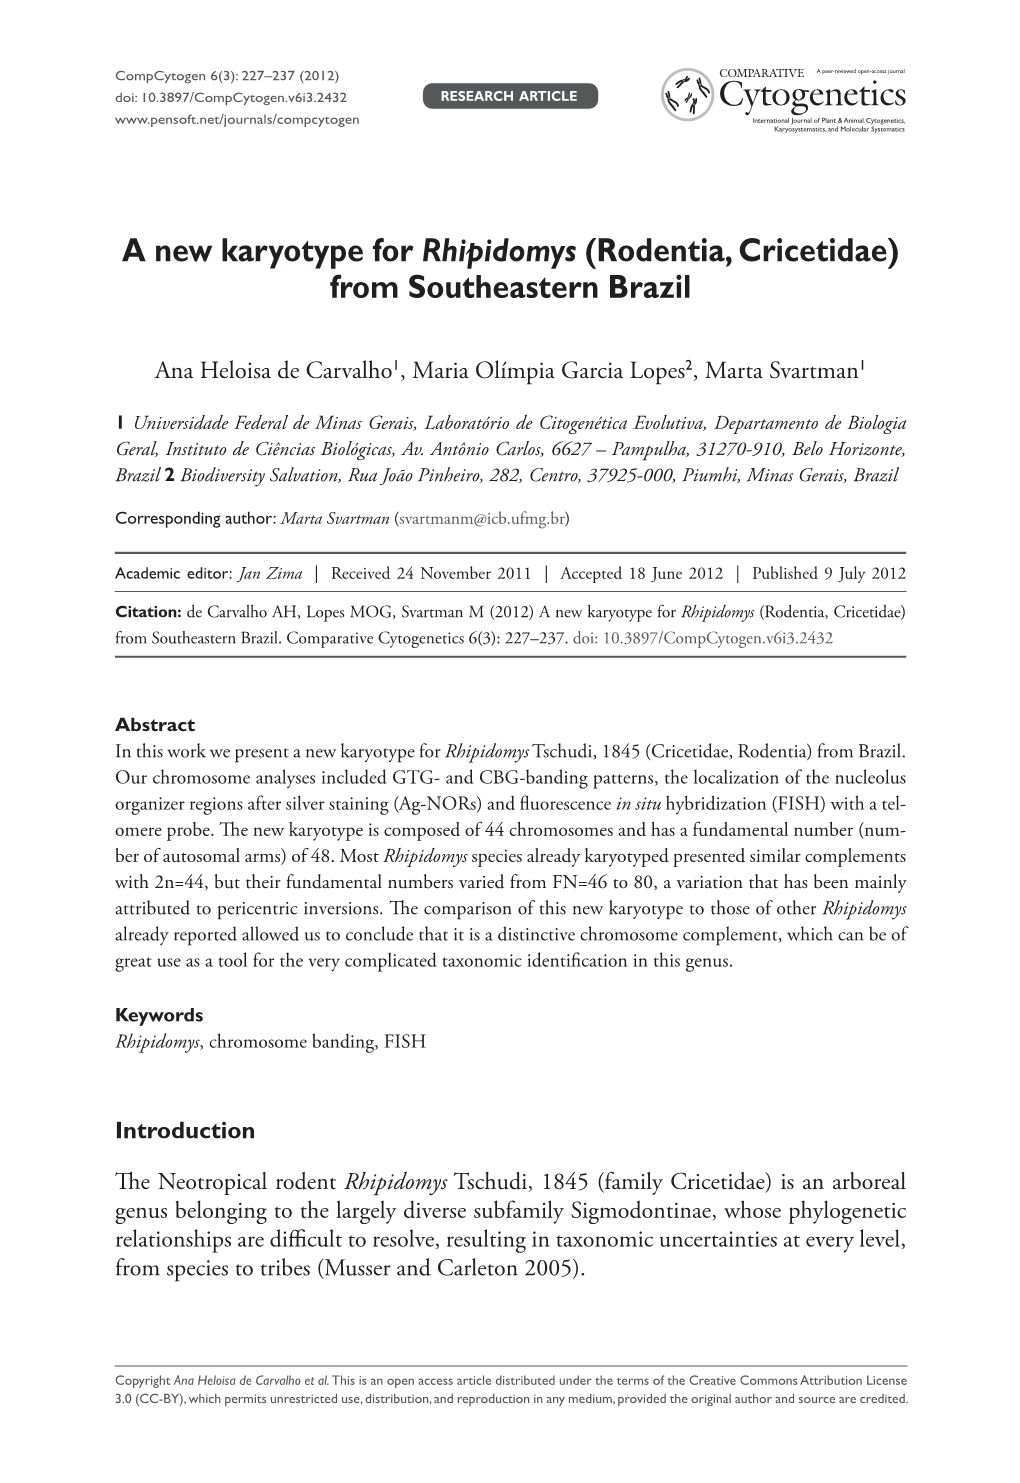 A New Karyotype for Rhipidomys (Rodentia, Cricetidae) from Southeastern Brazil